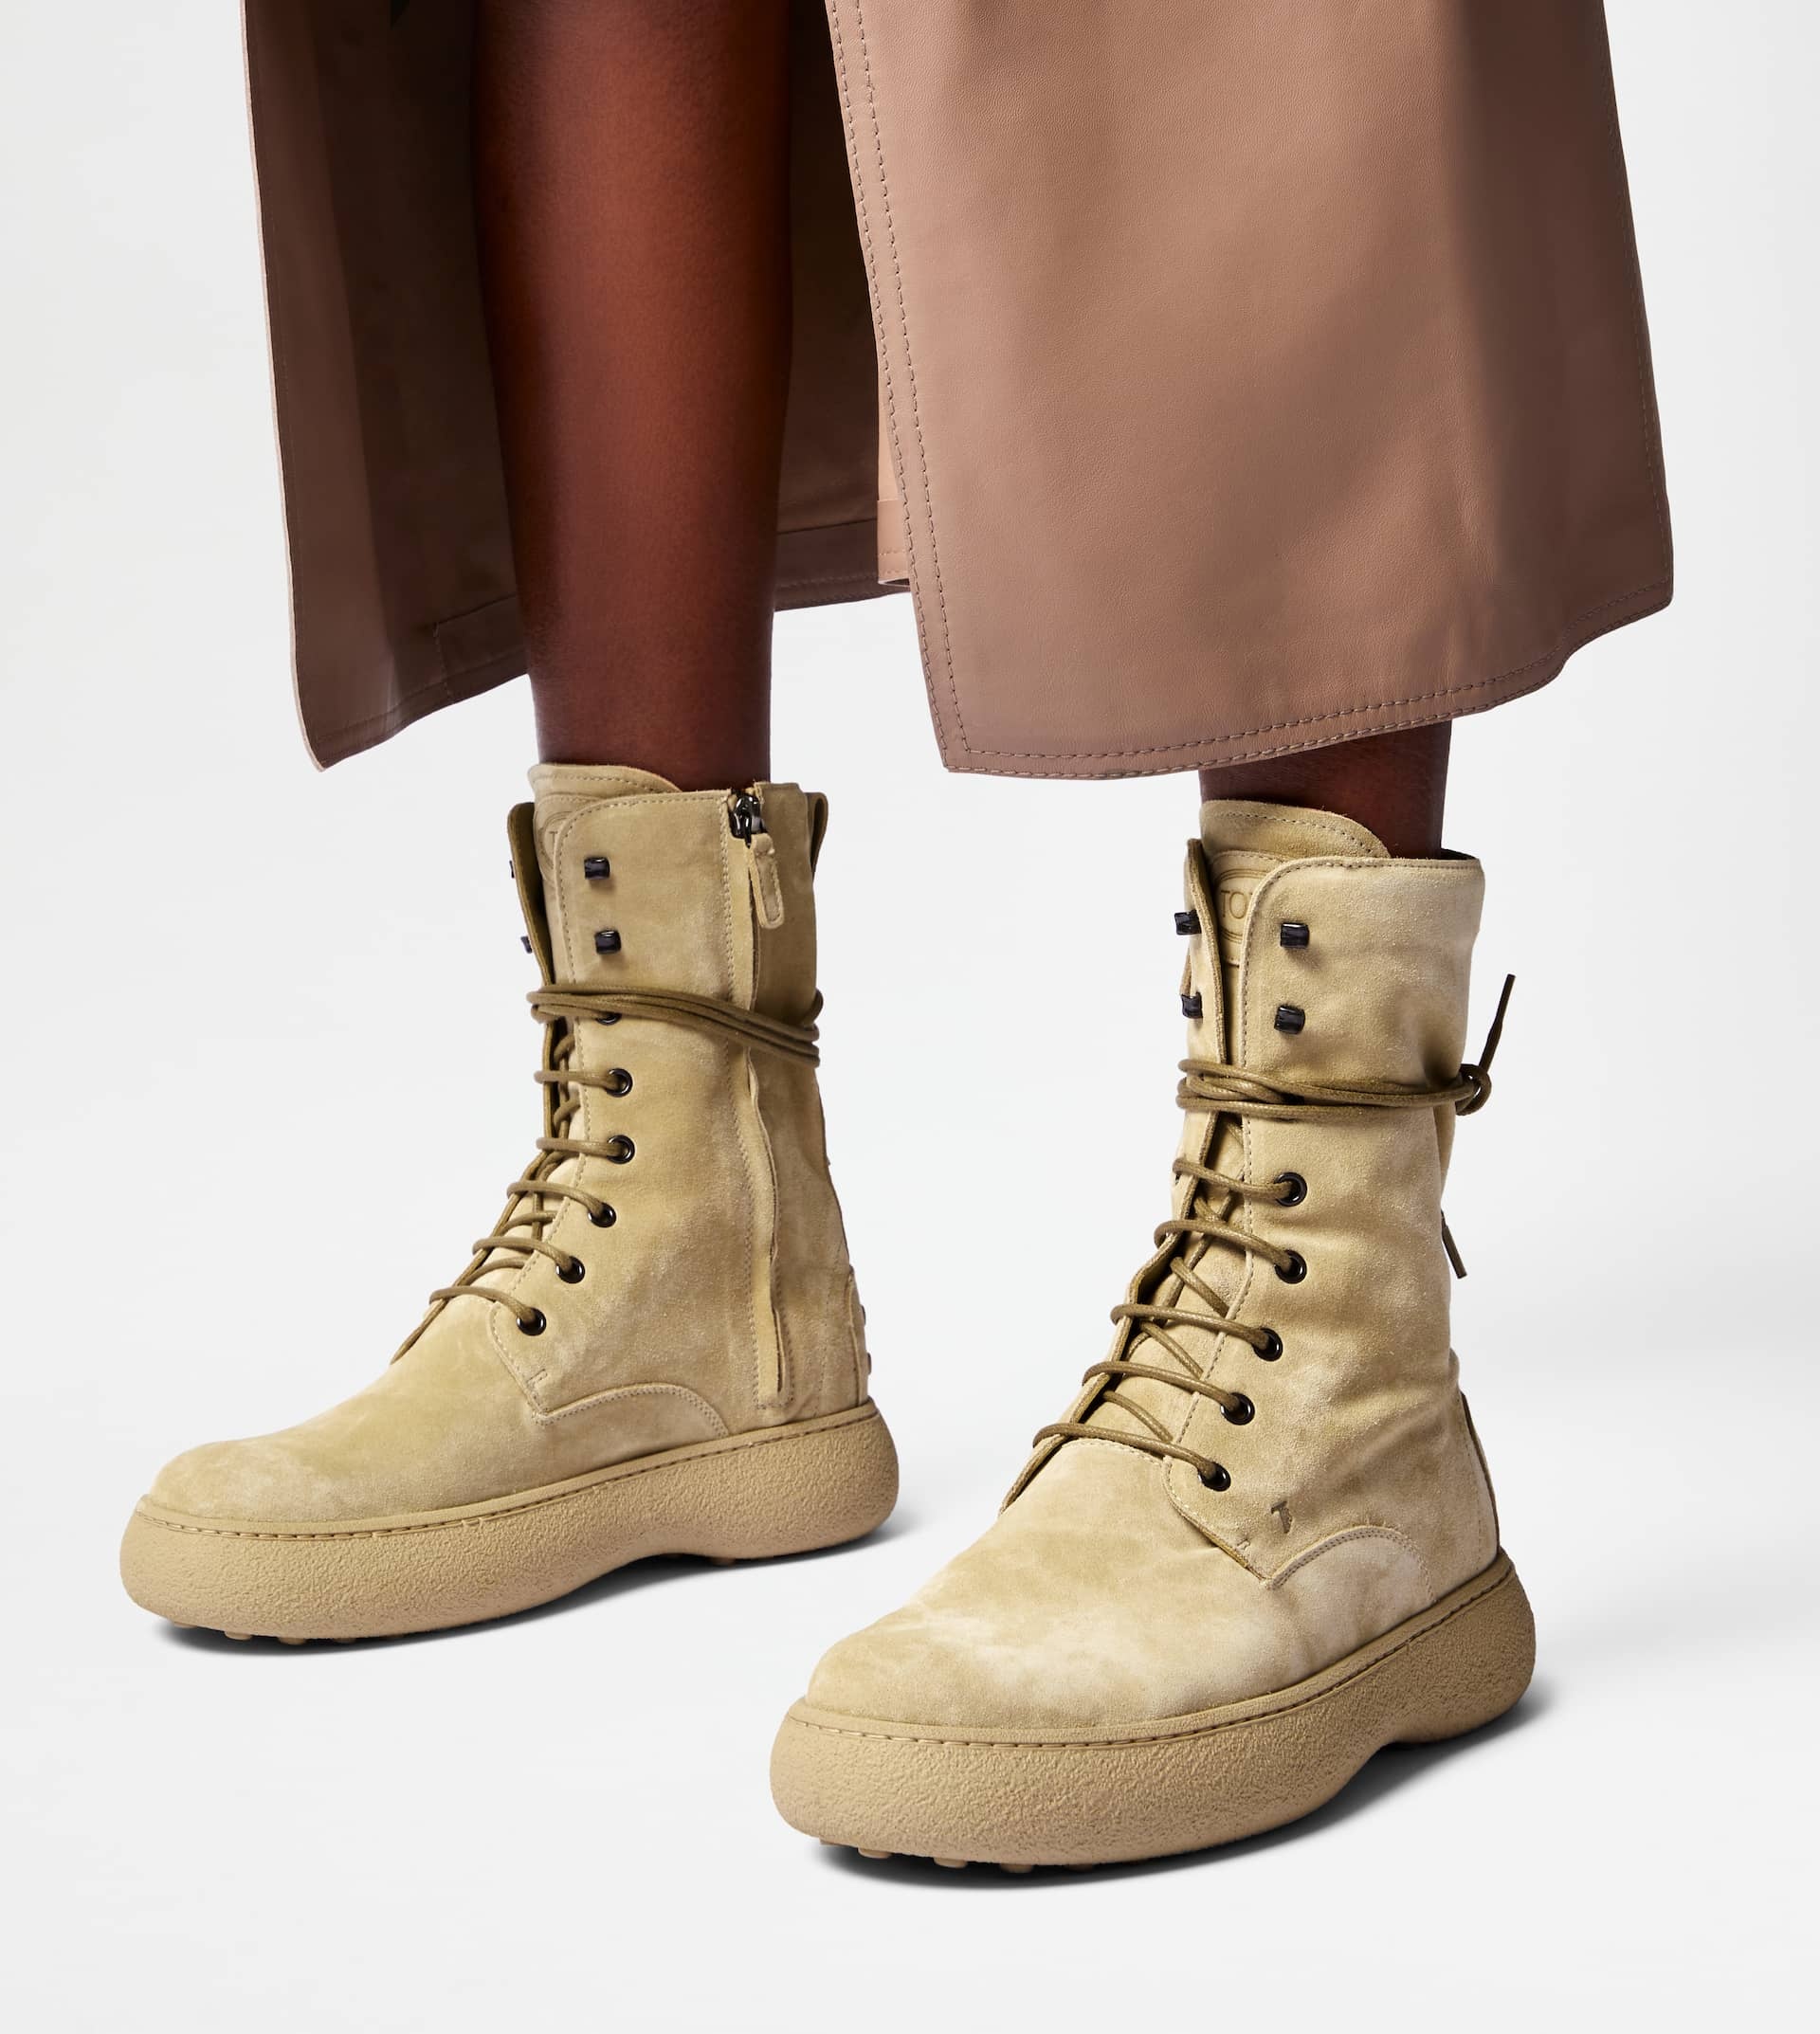 TOD'S W. G. LACE-UP ANKLE BOOTS IN SUEDE - BEIGE - 2